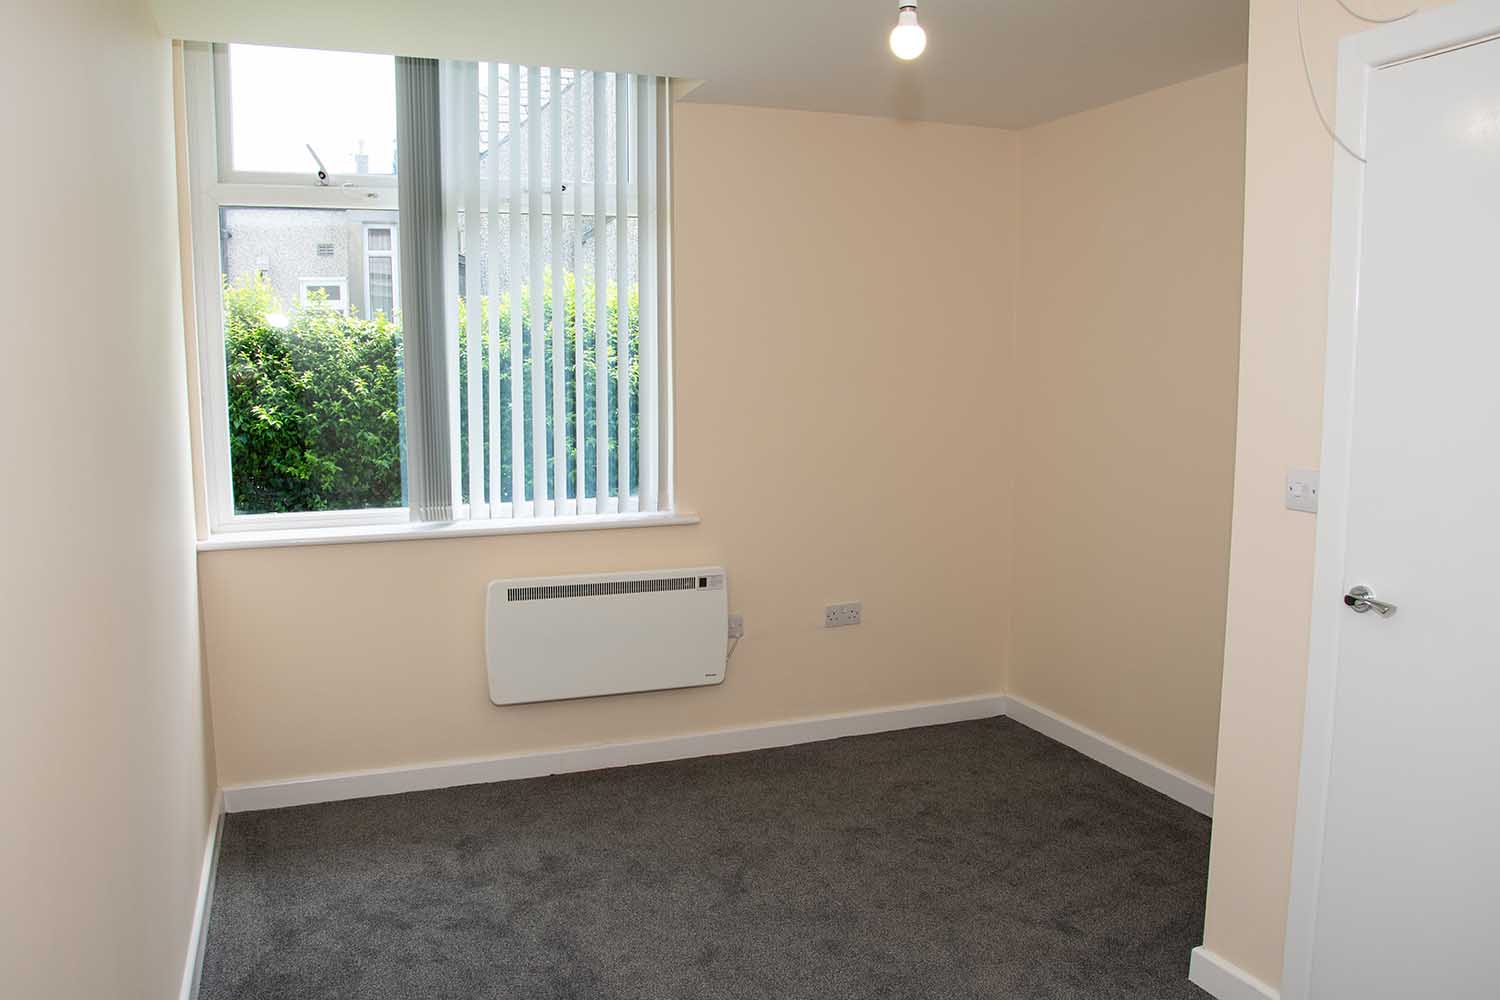 empty room with gray carpet and one window